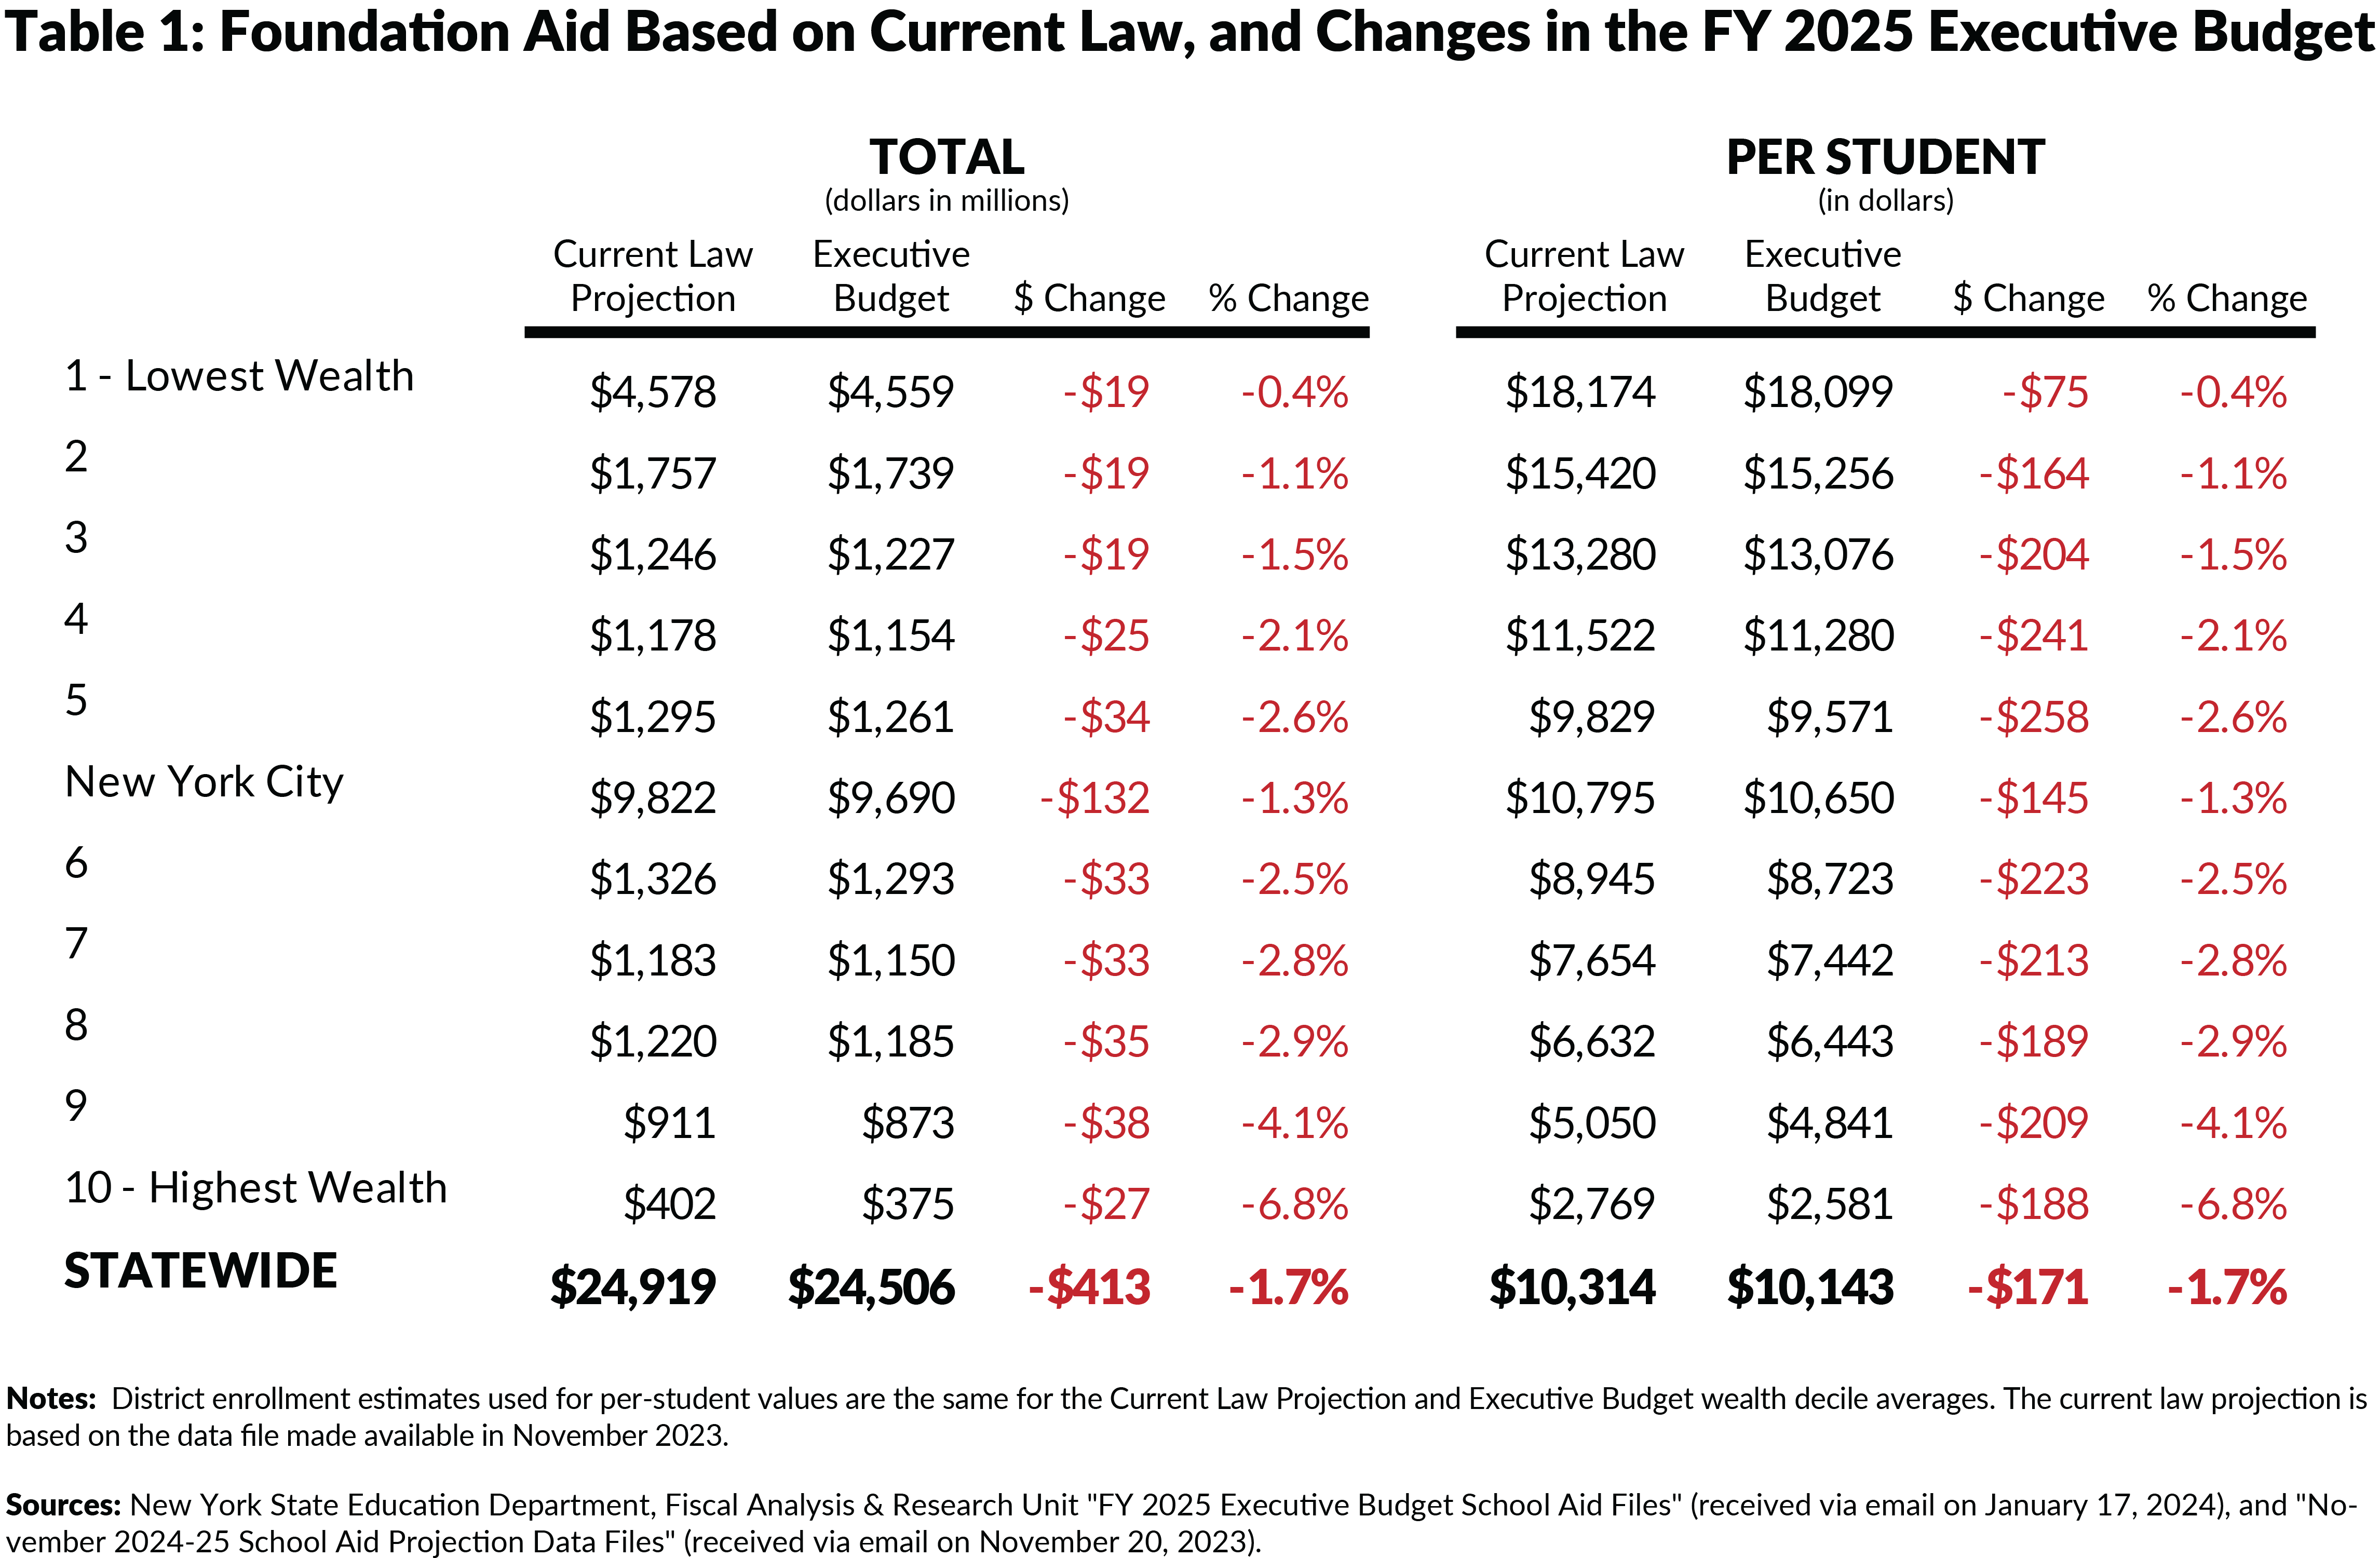 Table 1: Foundation Aid Based on Current Law, and Changes in the FY 2025 Executive Budget